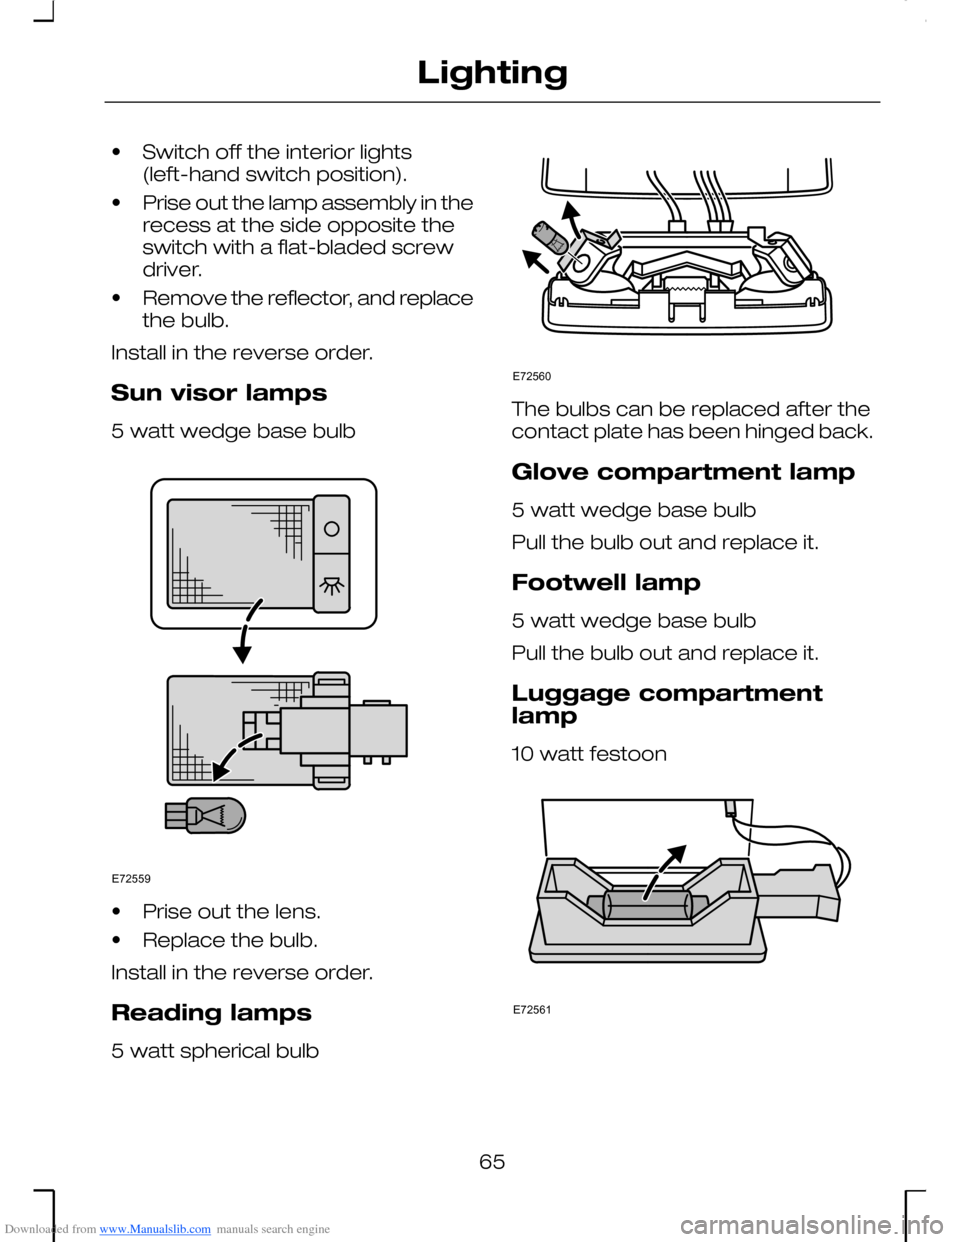 FORD MONDEO 2006 2.G Owners Manual Downloaded from www.Manualslib.com manuals search engine •Switch off the interior lights(left-hand switch position).
•Prise out the lamp assembly in therecess at the side opposite theswitch with a